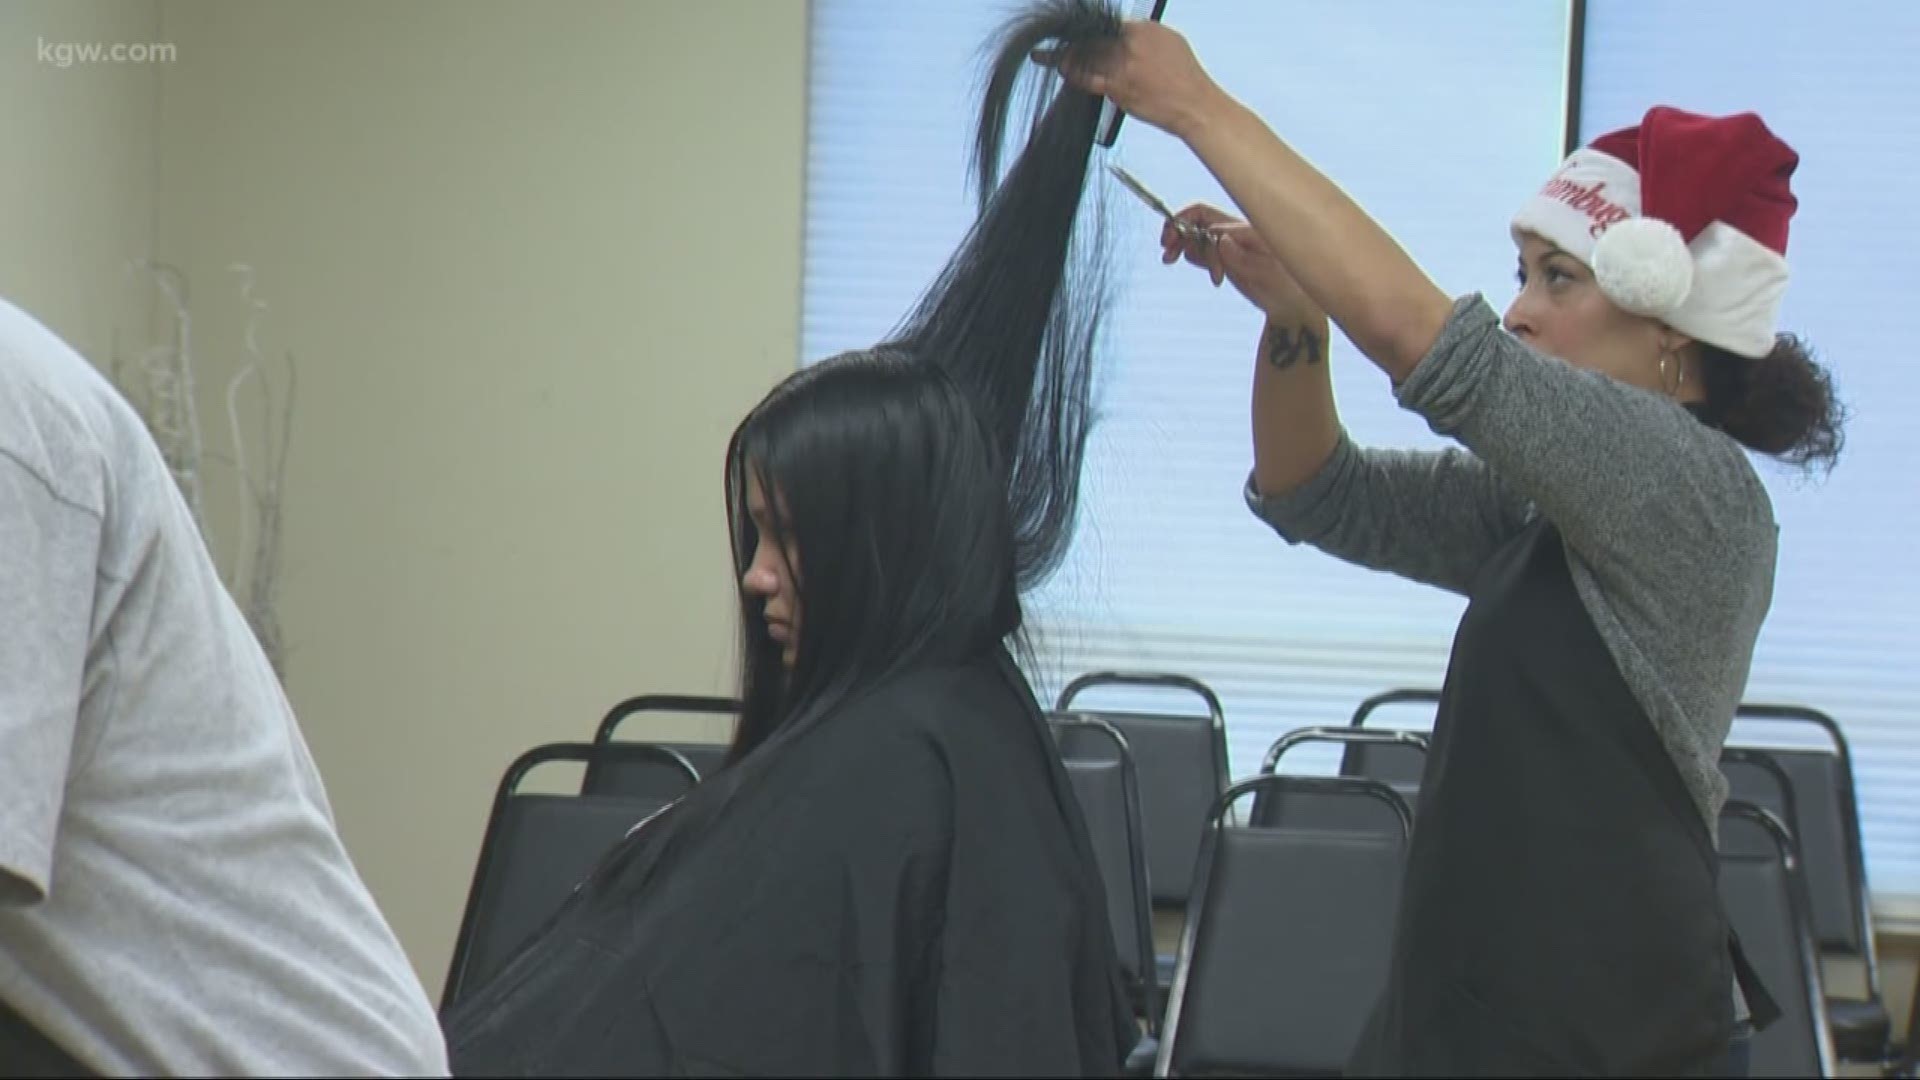 Kids get free haircuts from local nonprofits